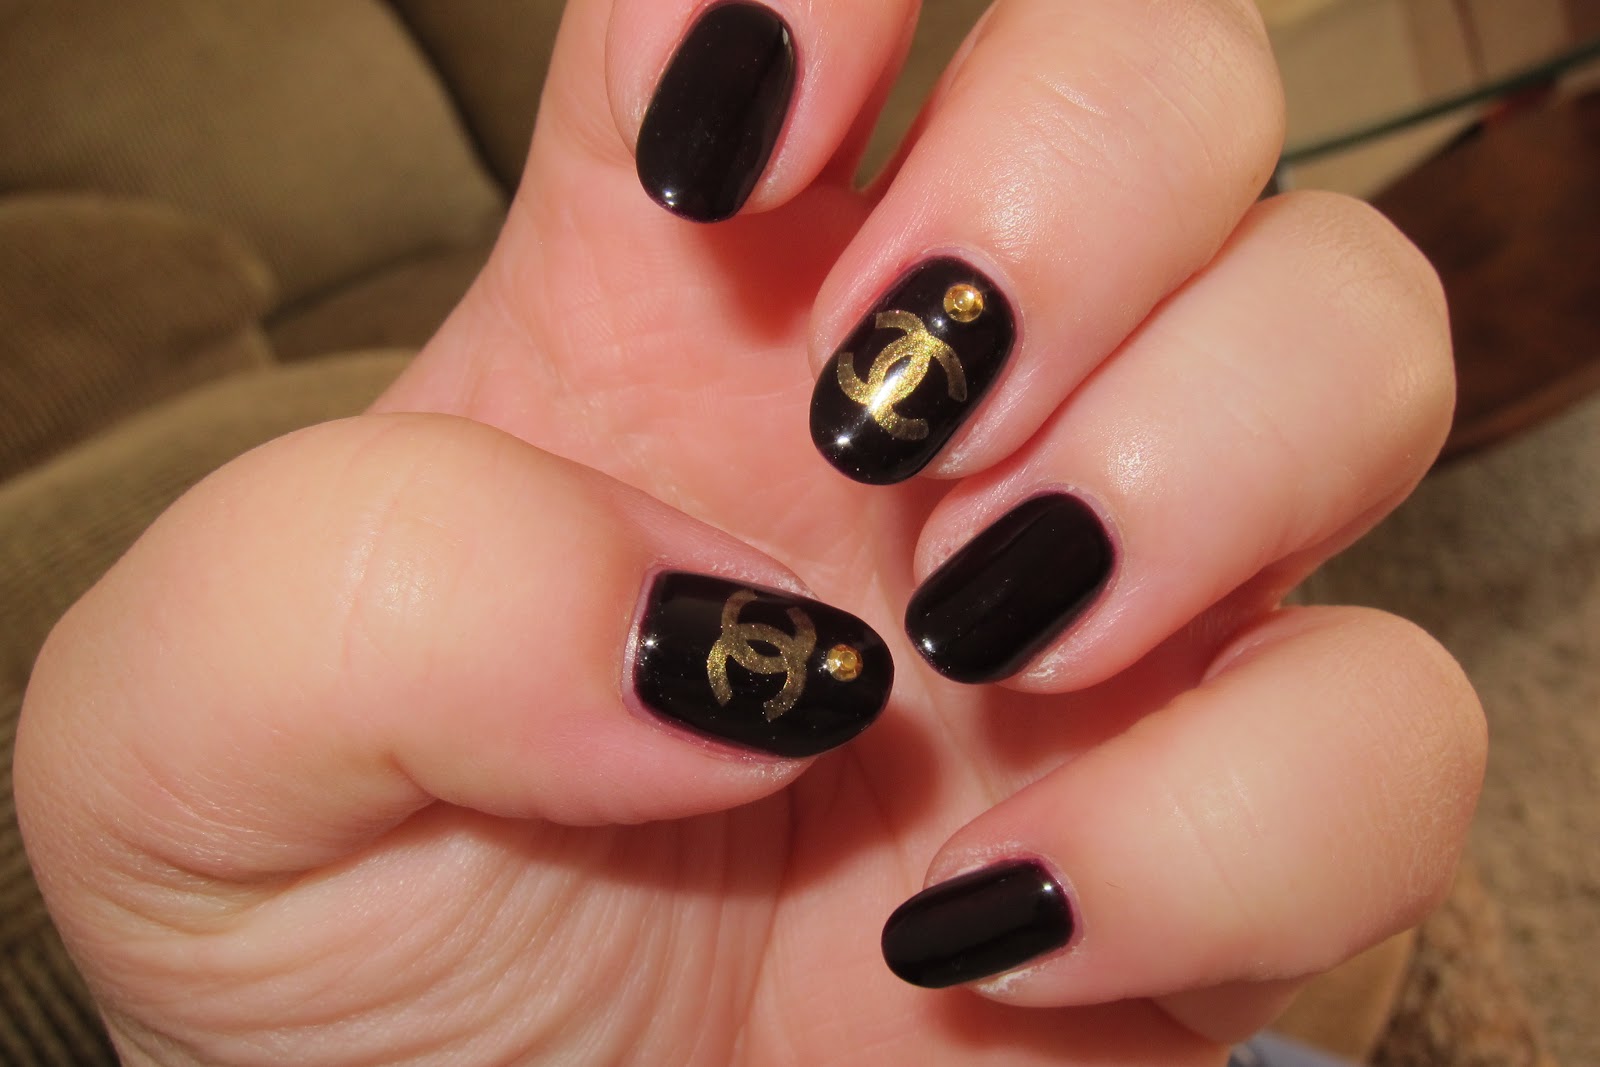 4. Quilted pattern Chanel nails - wide 1